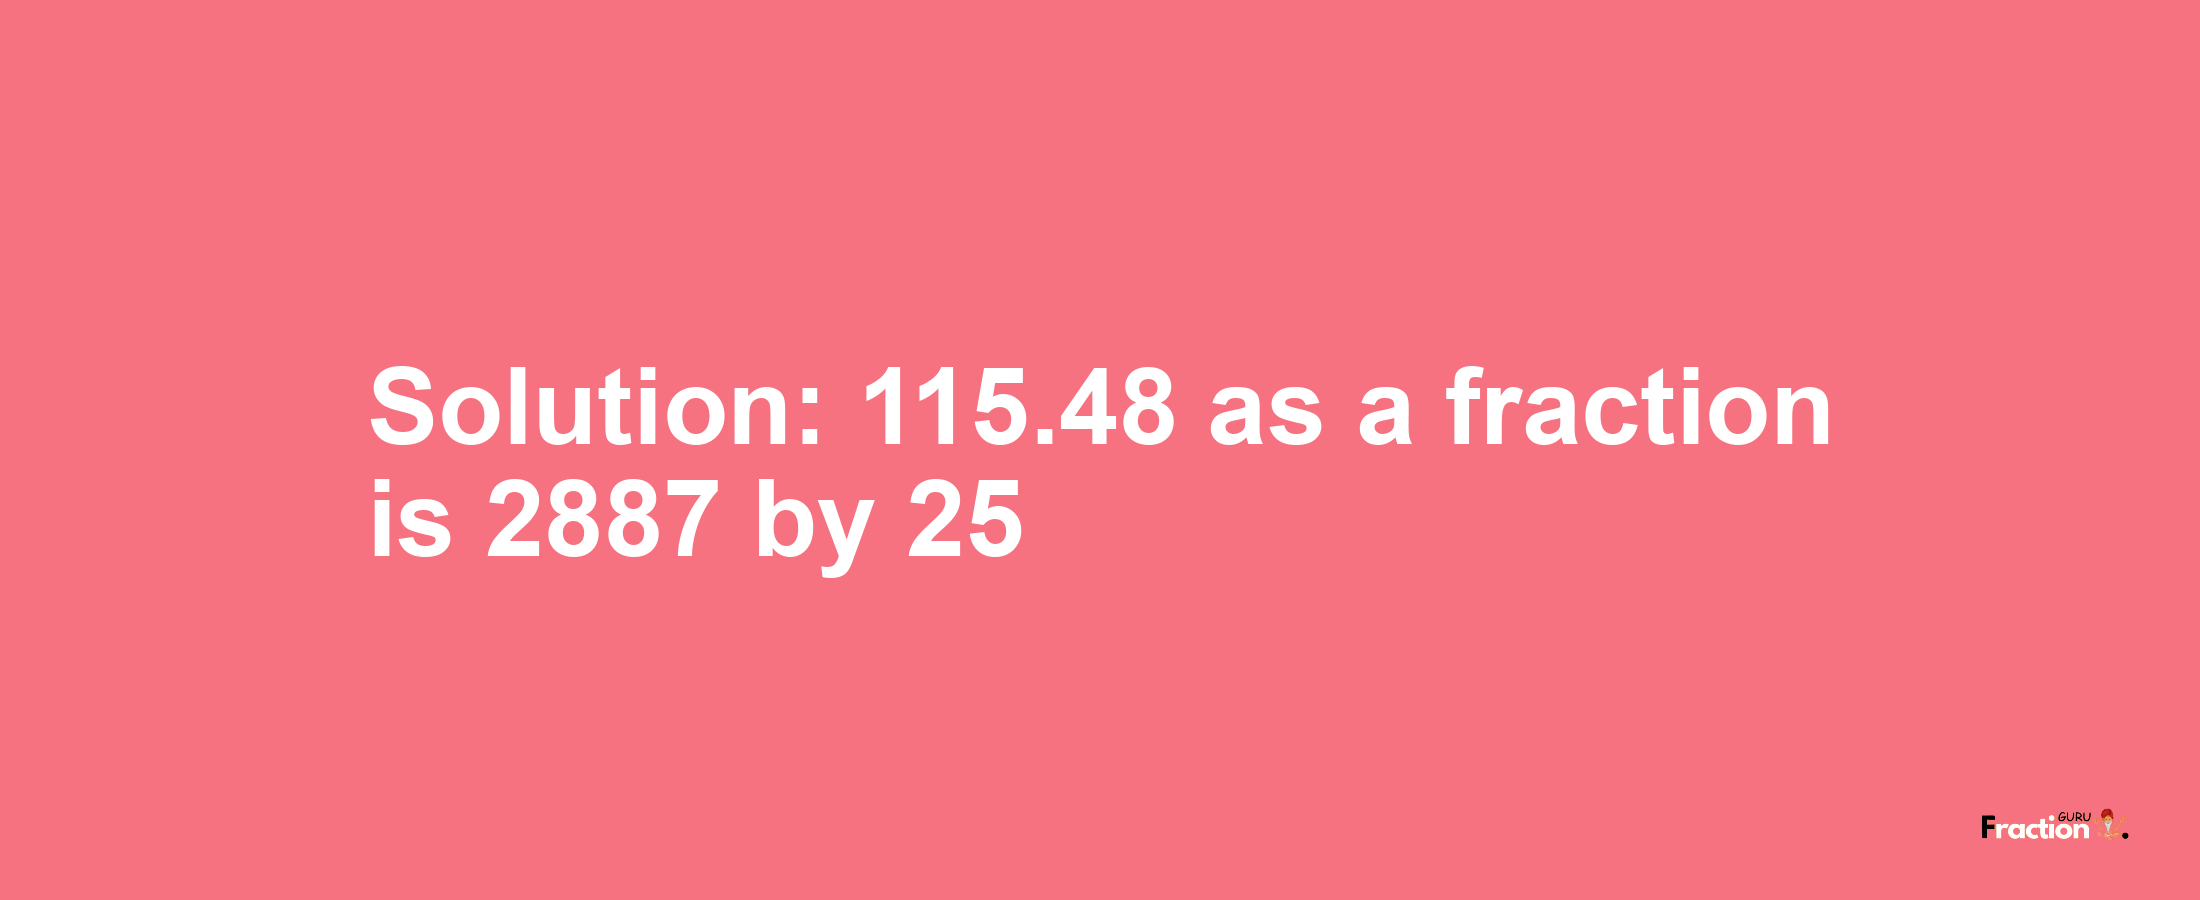 Solution:115.48 as a fraction is 2887/25